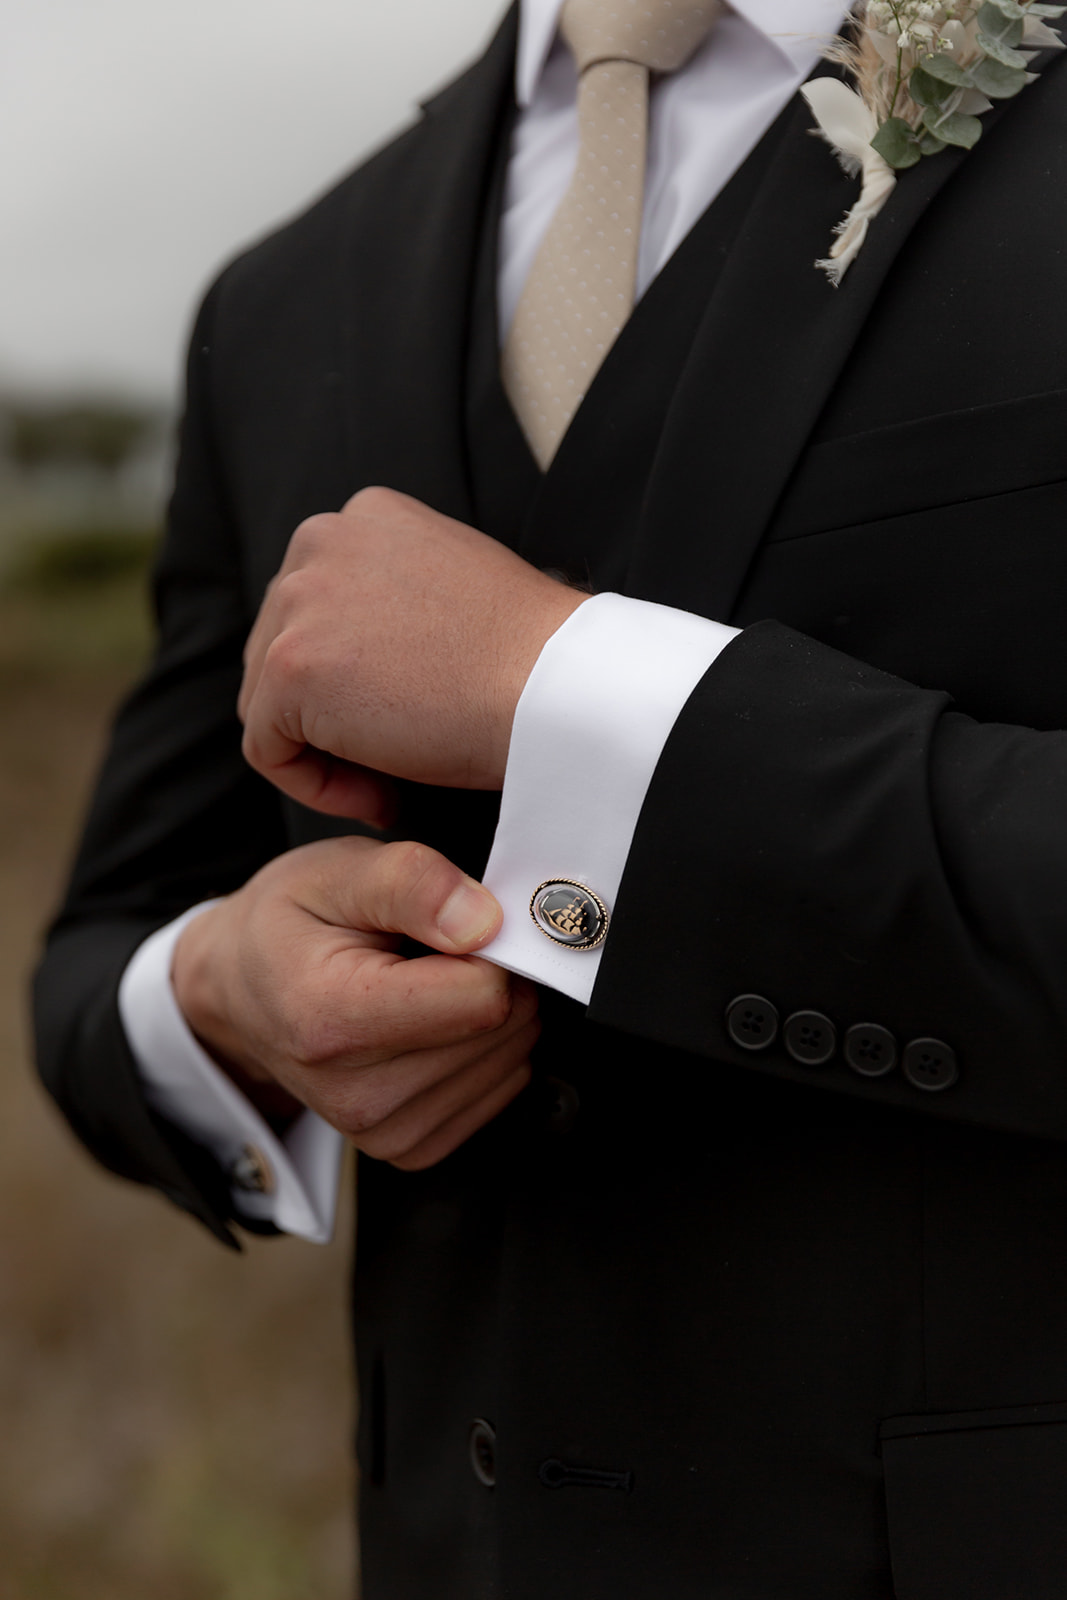 Groom shows cufflinks with Sail boat on hit as homage to his nautical hobbies